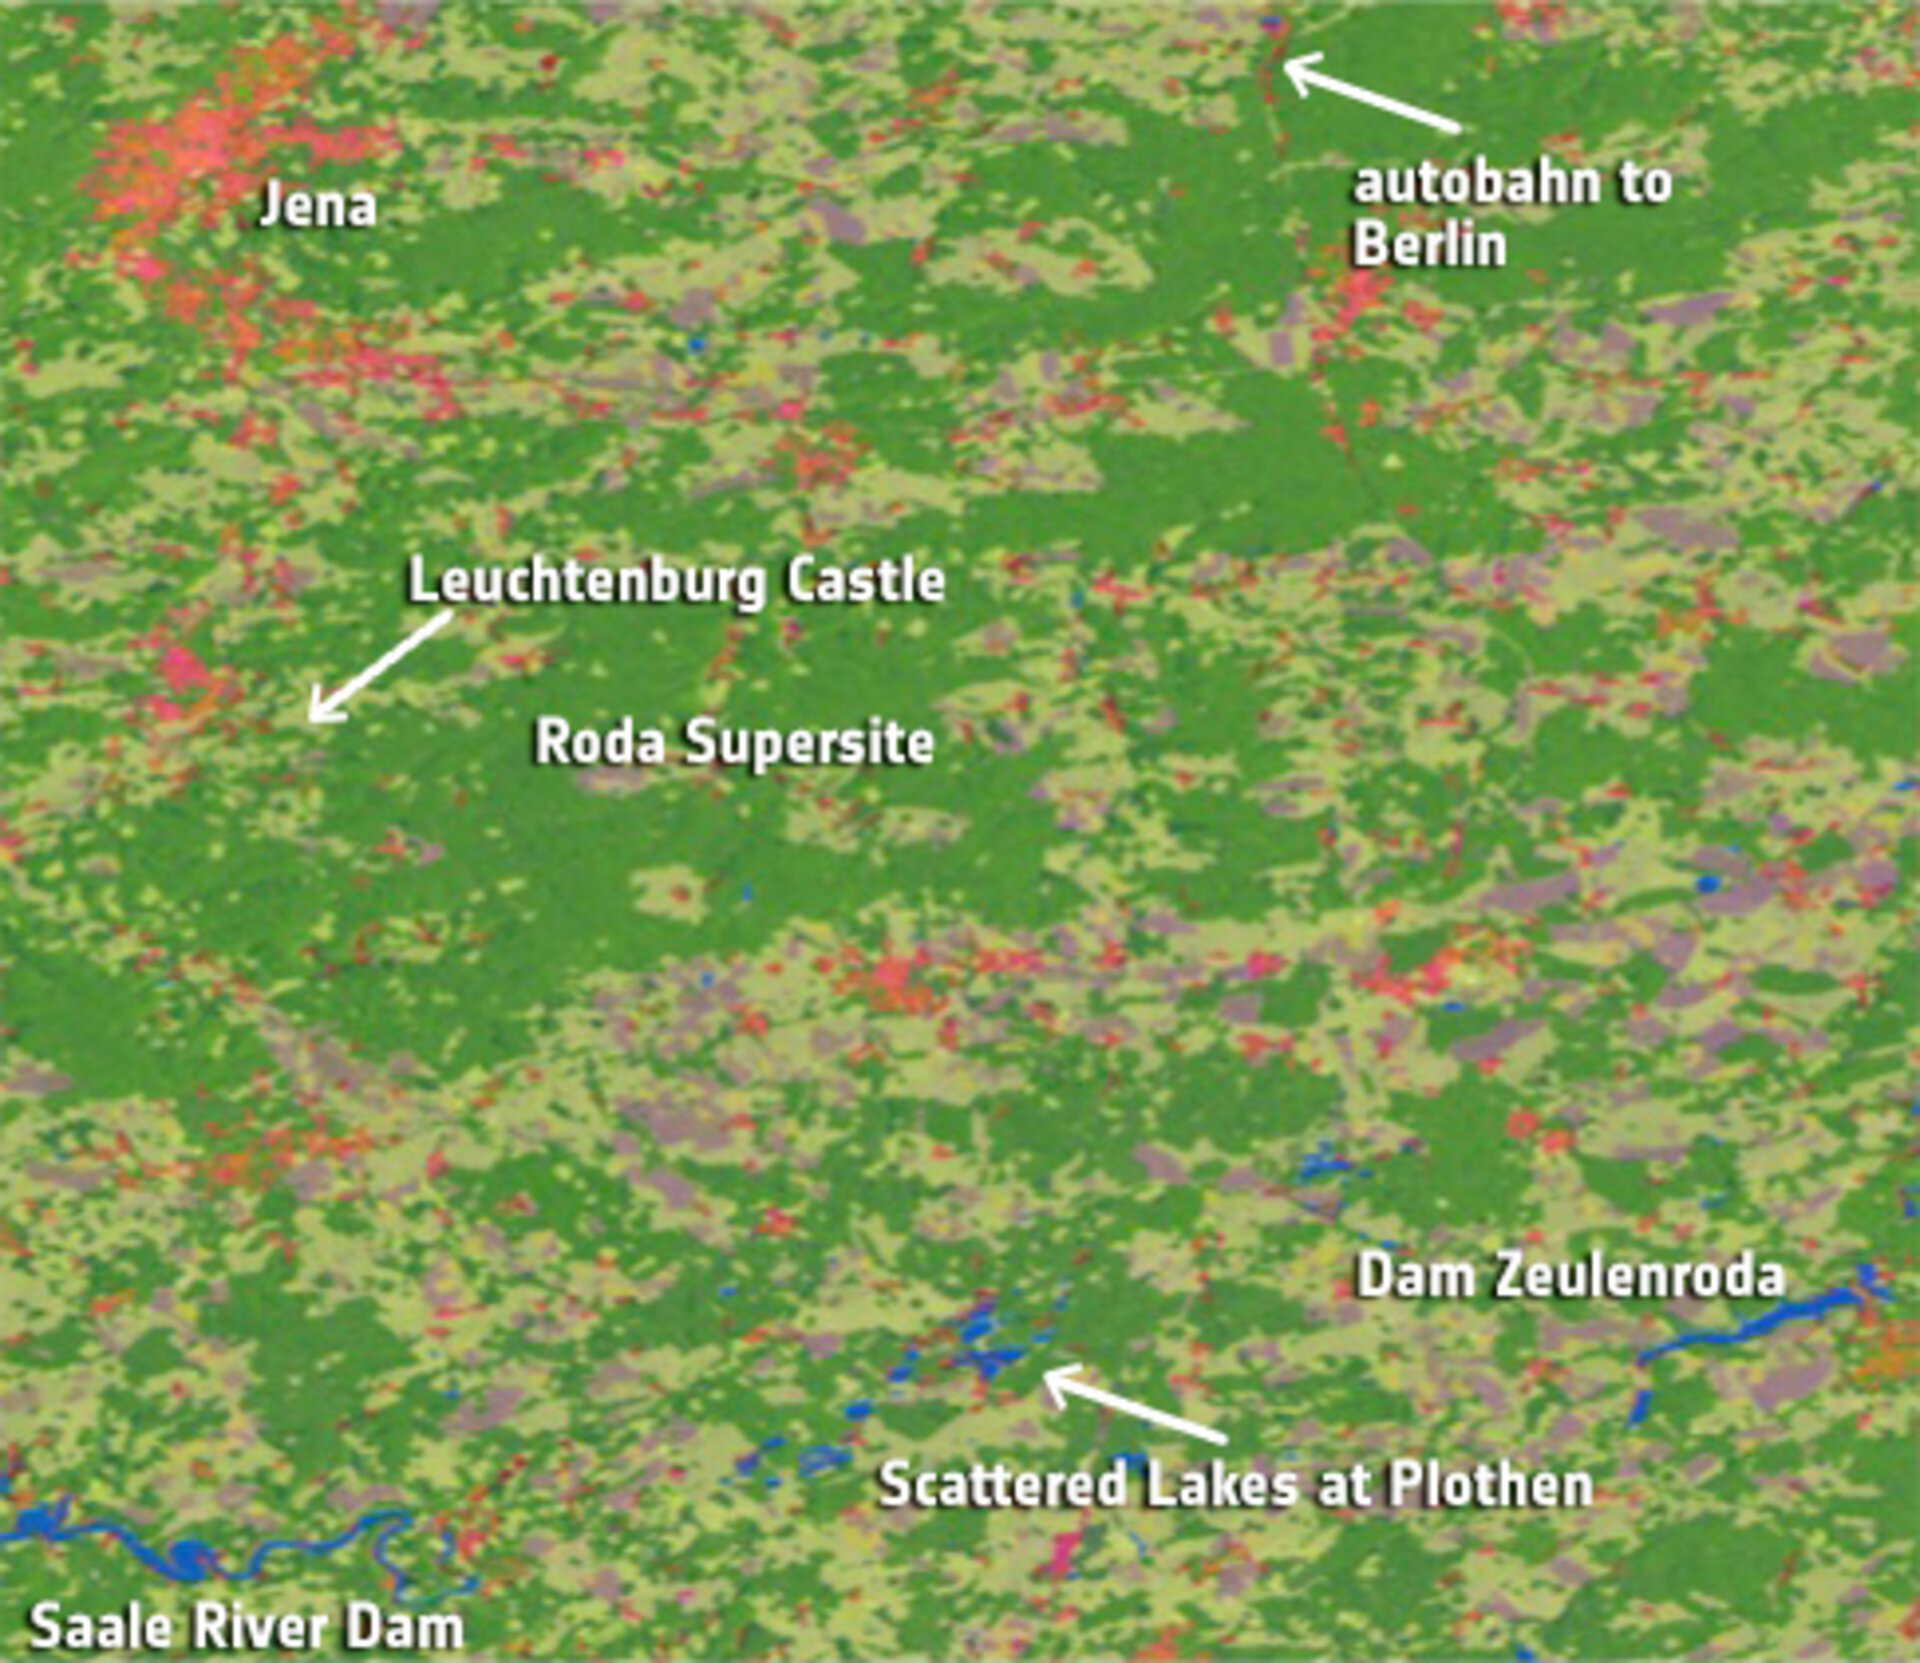 Land cover mapping